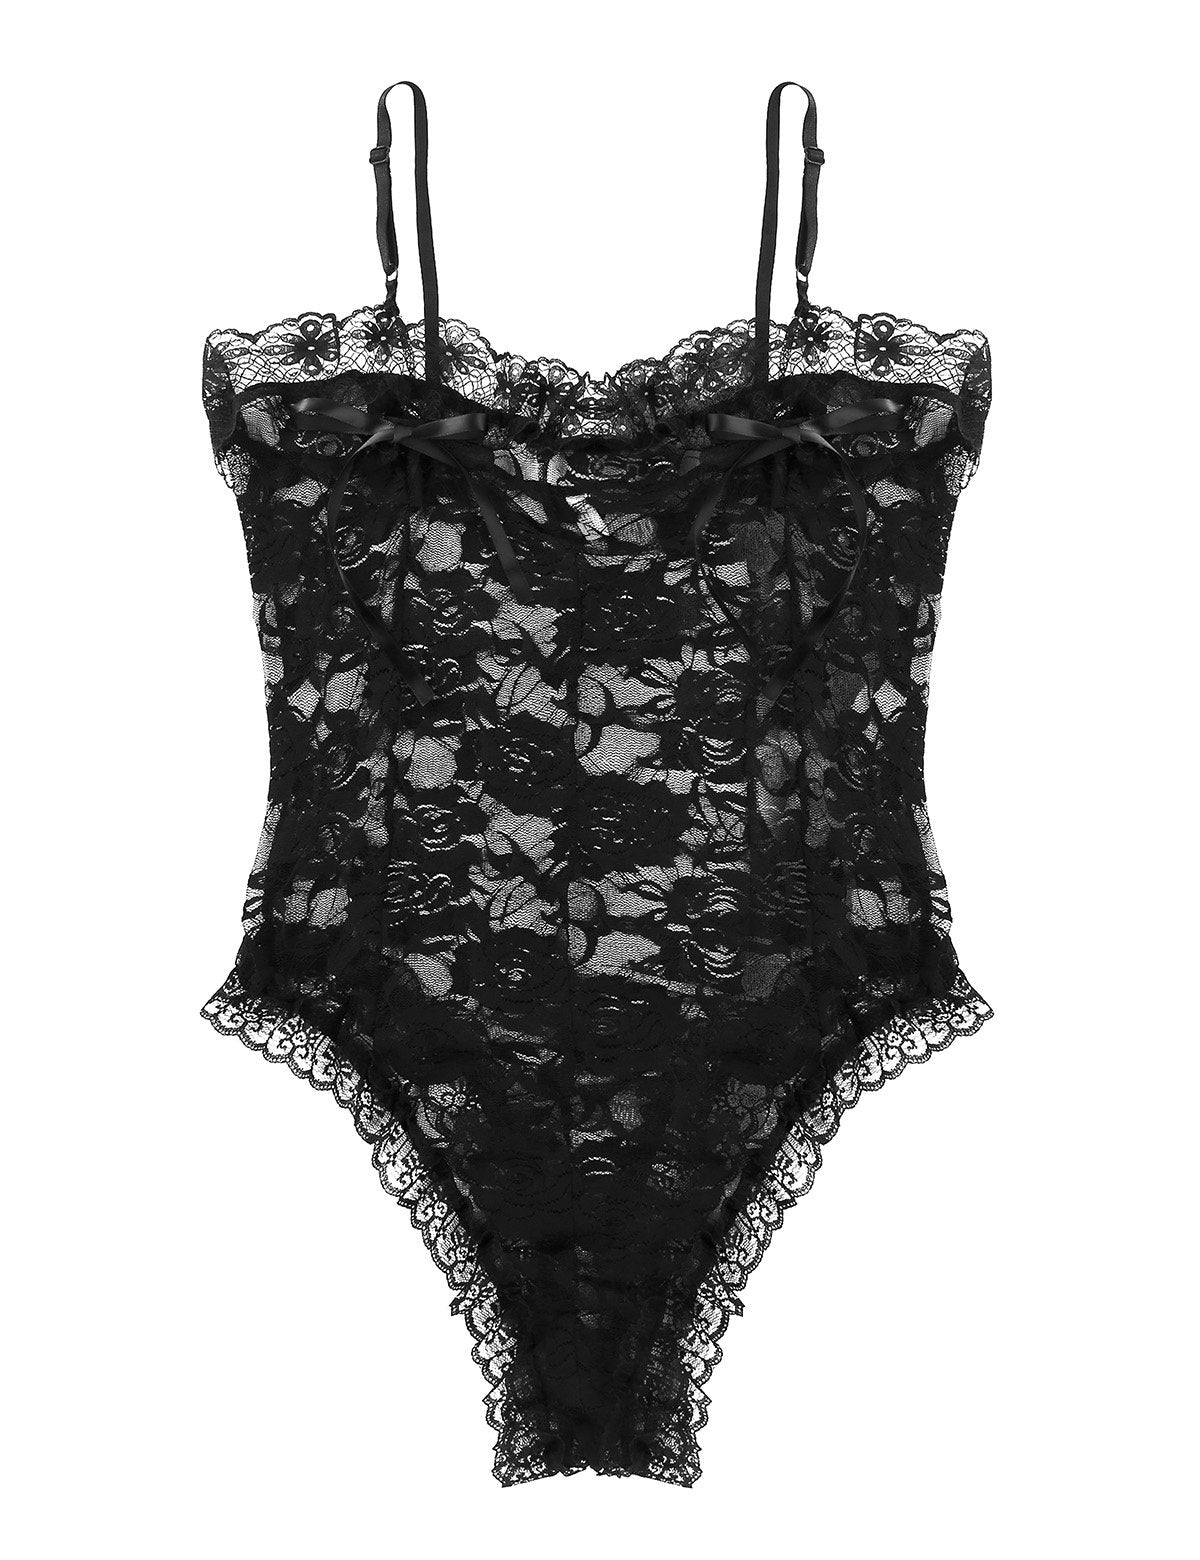 Mens Sheer Lace Bodysuit with Lace Trim Open Nipples Black